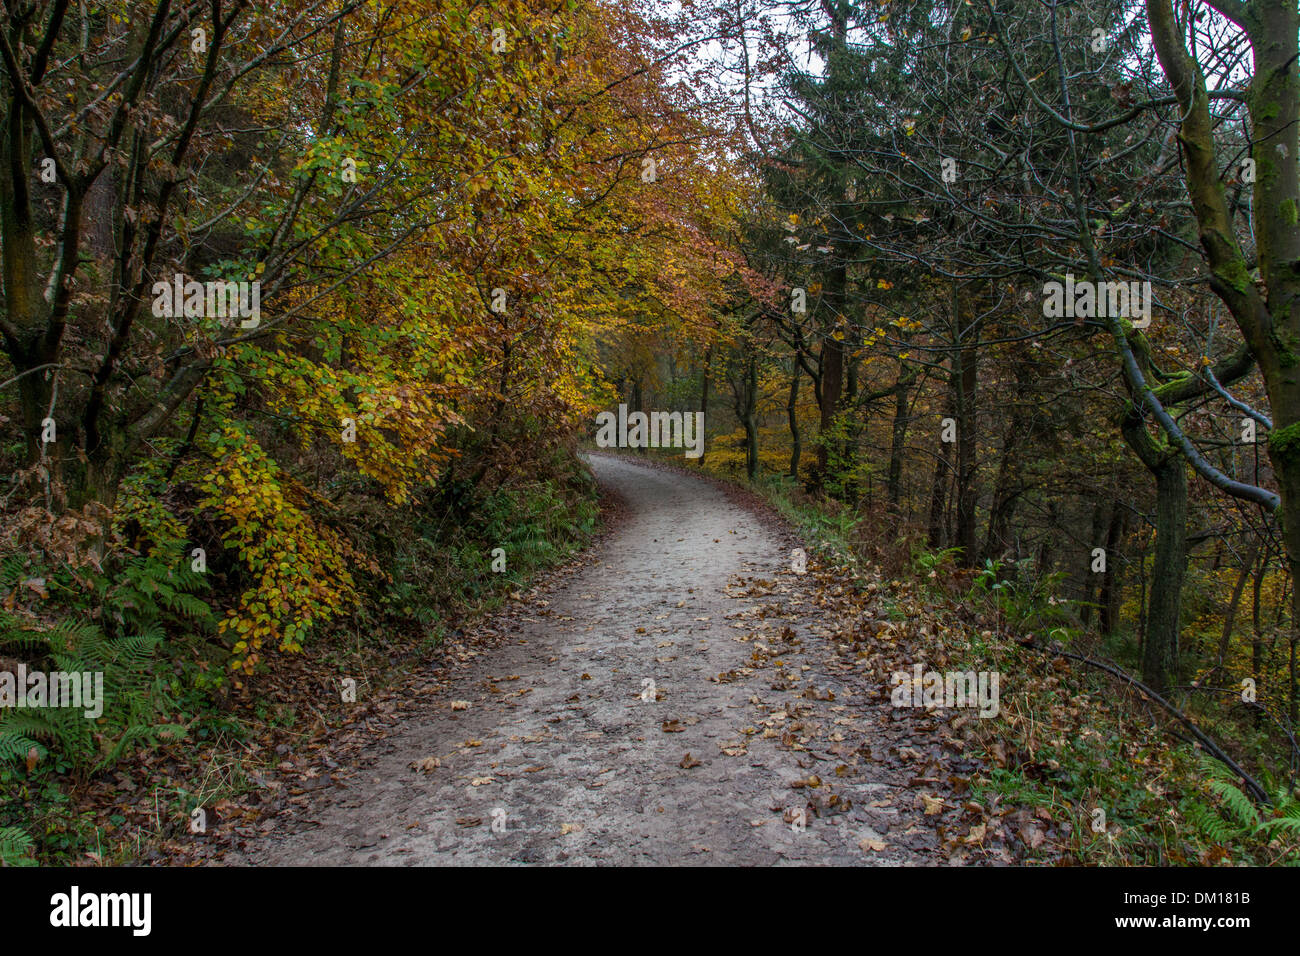 Tree lined lane in Autumn with a damp road leading into the distance. Stock Photo